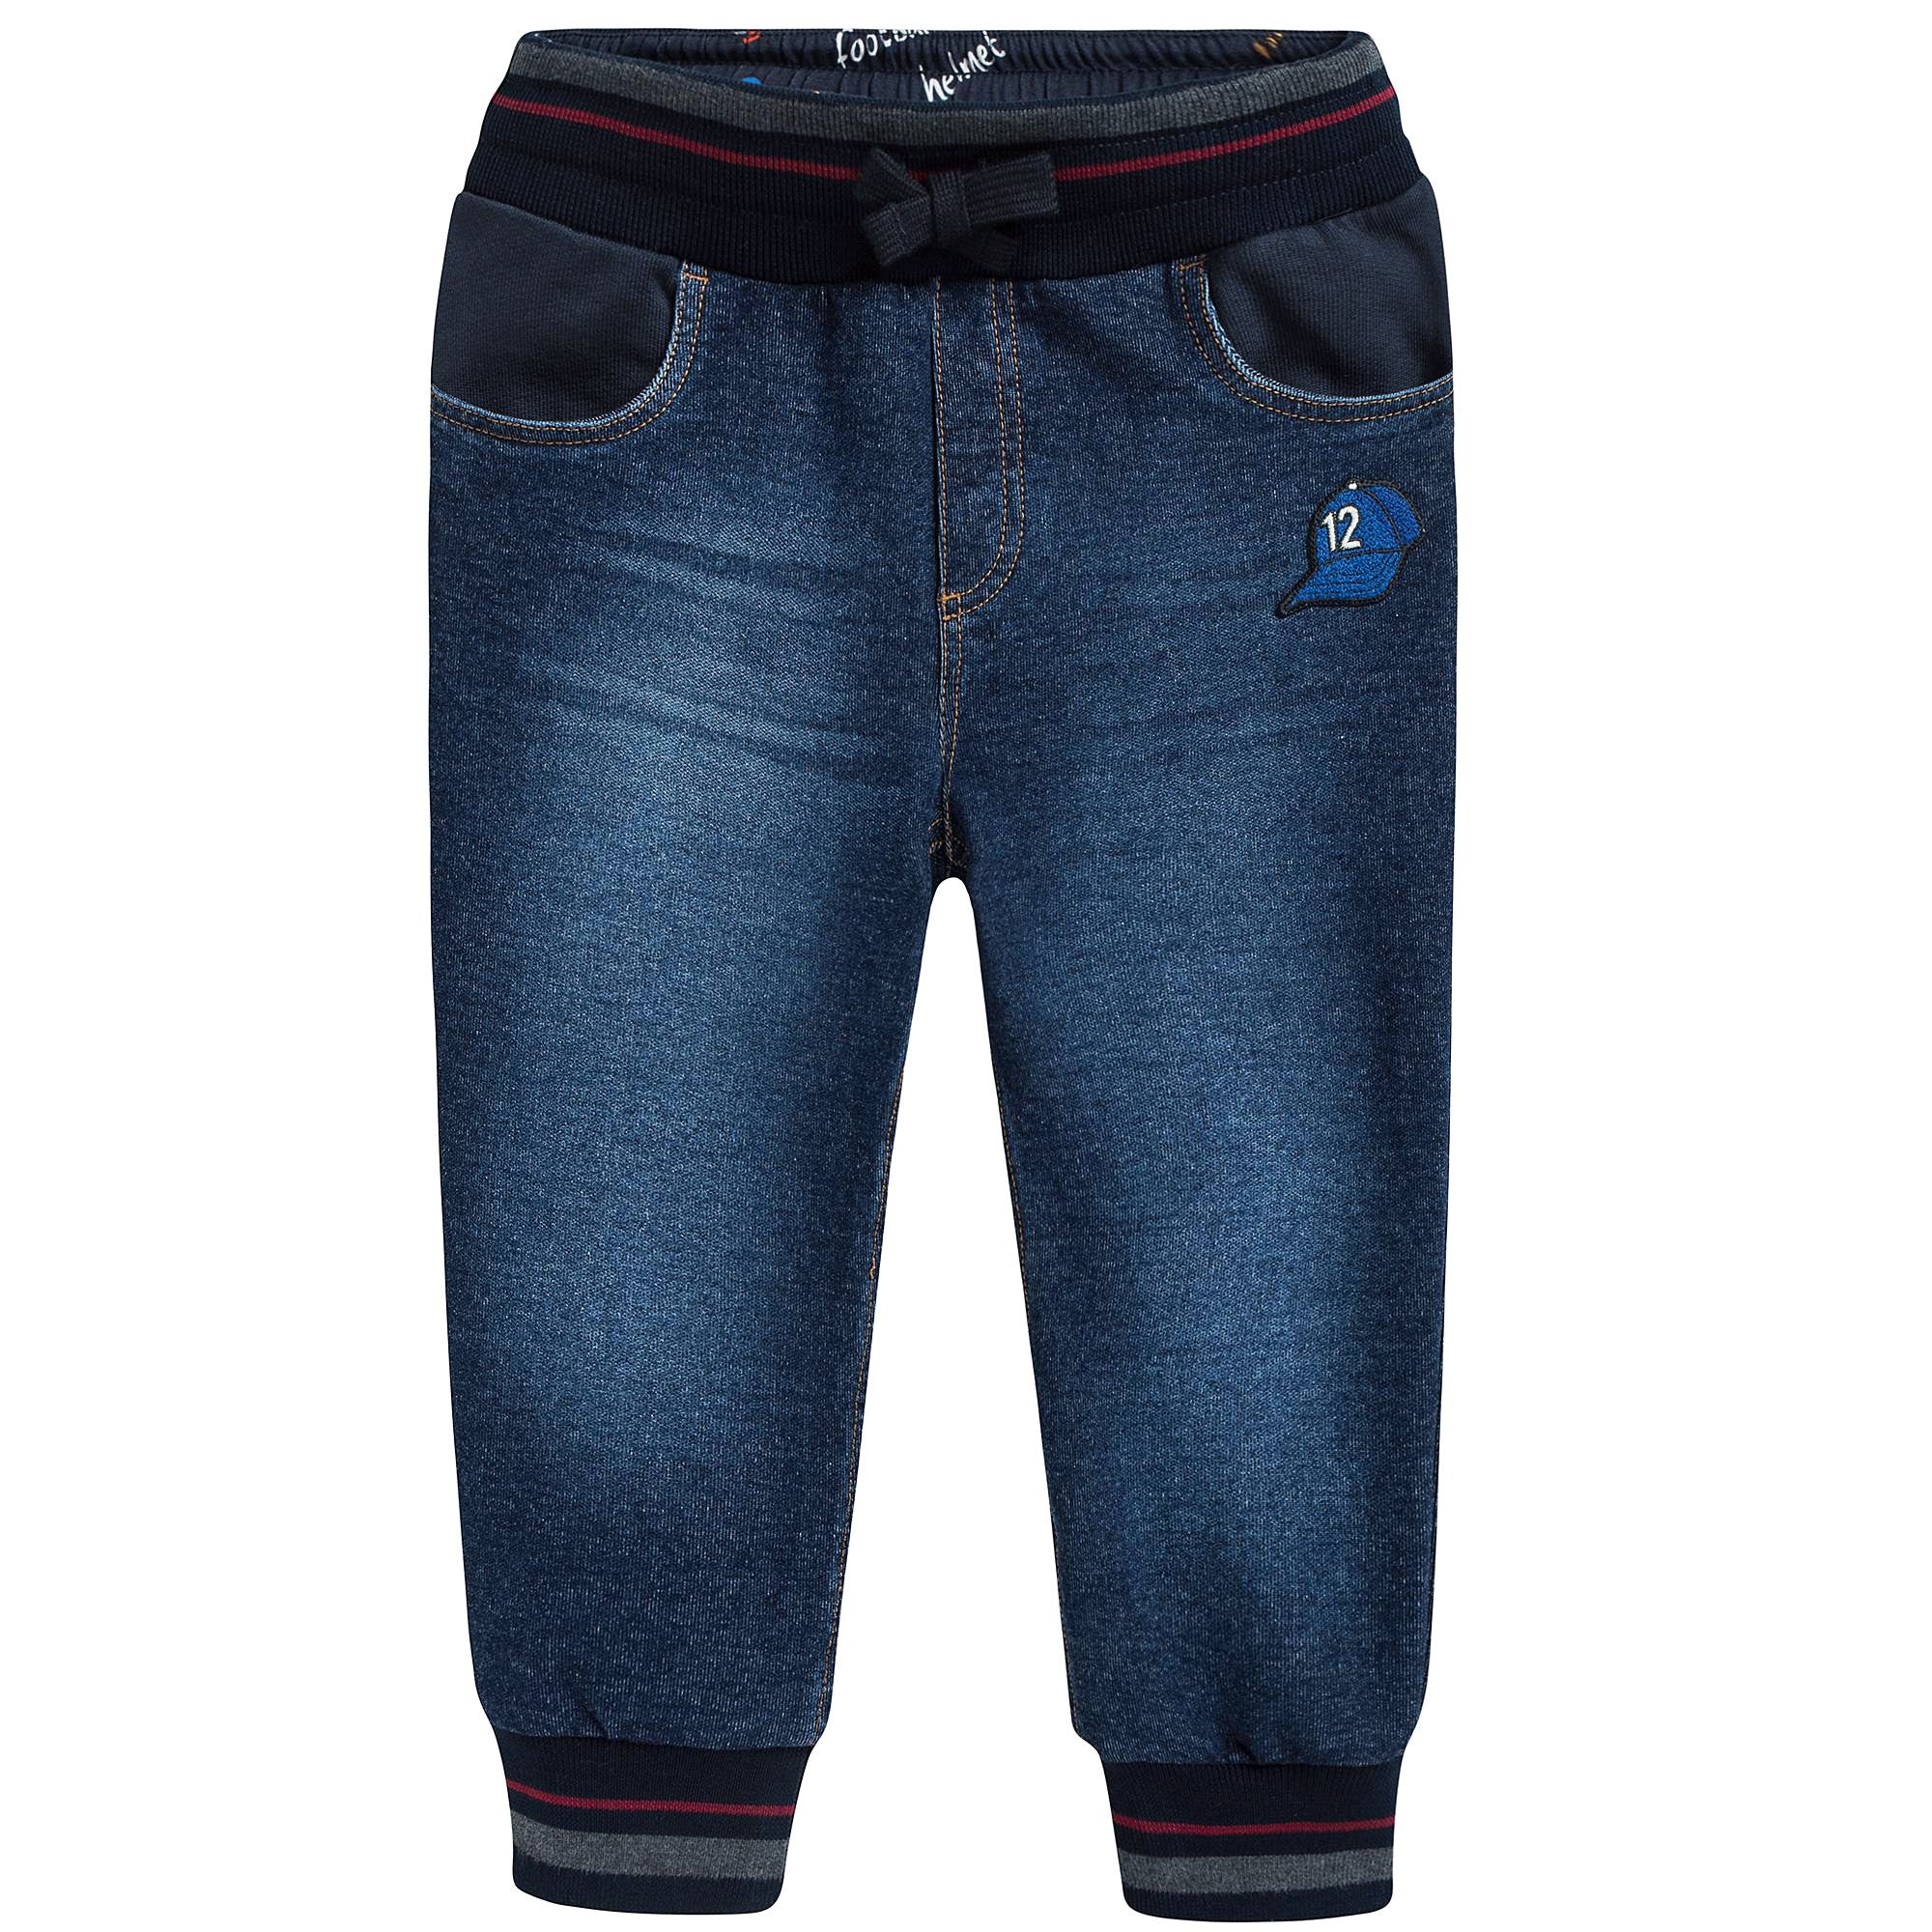 Boys Blue Jeans with Patches